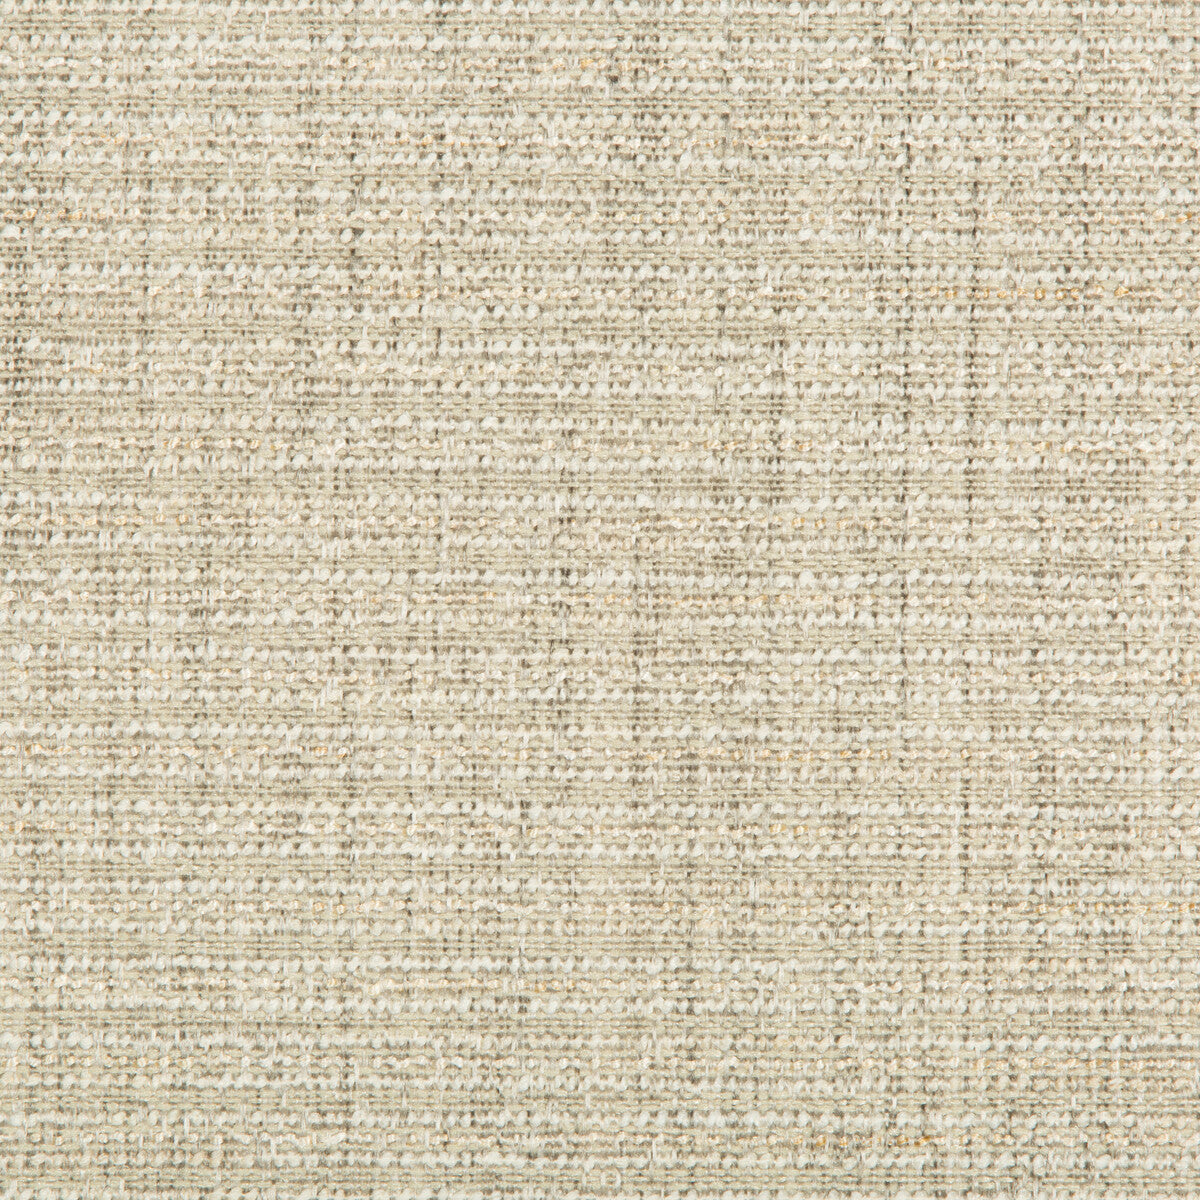 Kravet Smart fabric in 35396-1123 color - pattern 35396.1123.0 - by Kravet Smart in the Performance Crypton Home collection